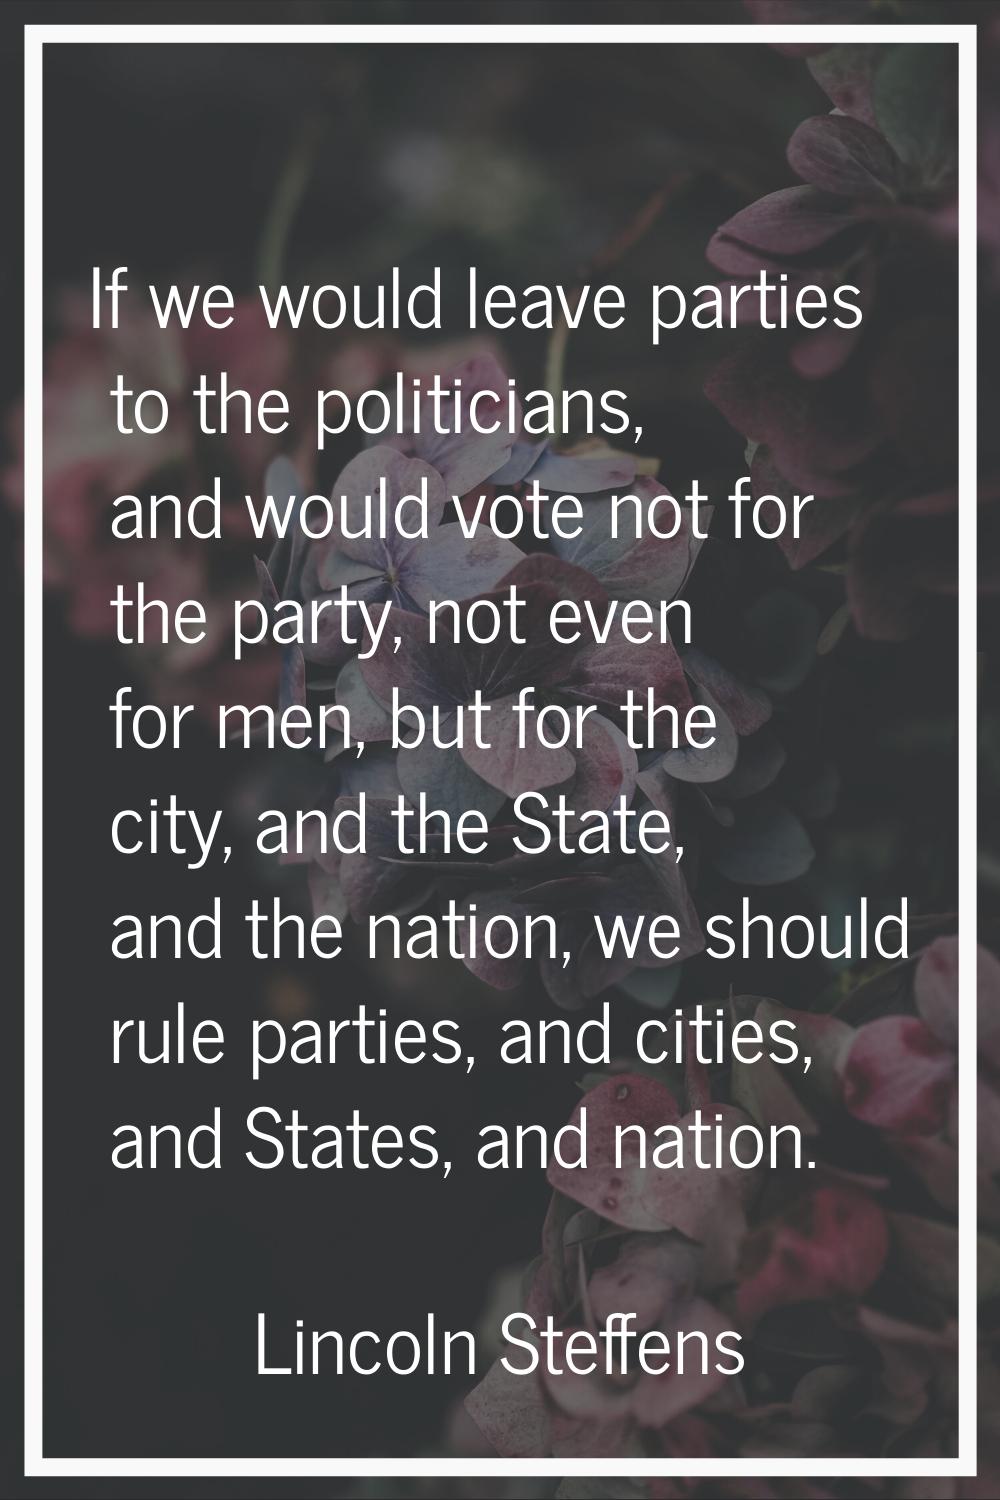 If we would leave parties to the politicians, and would vote not for the party, not even for men, b